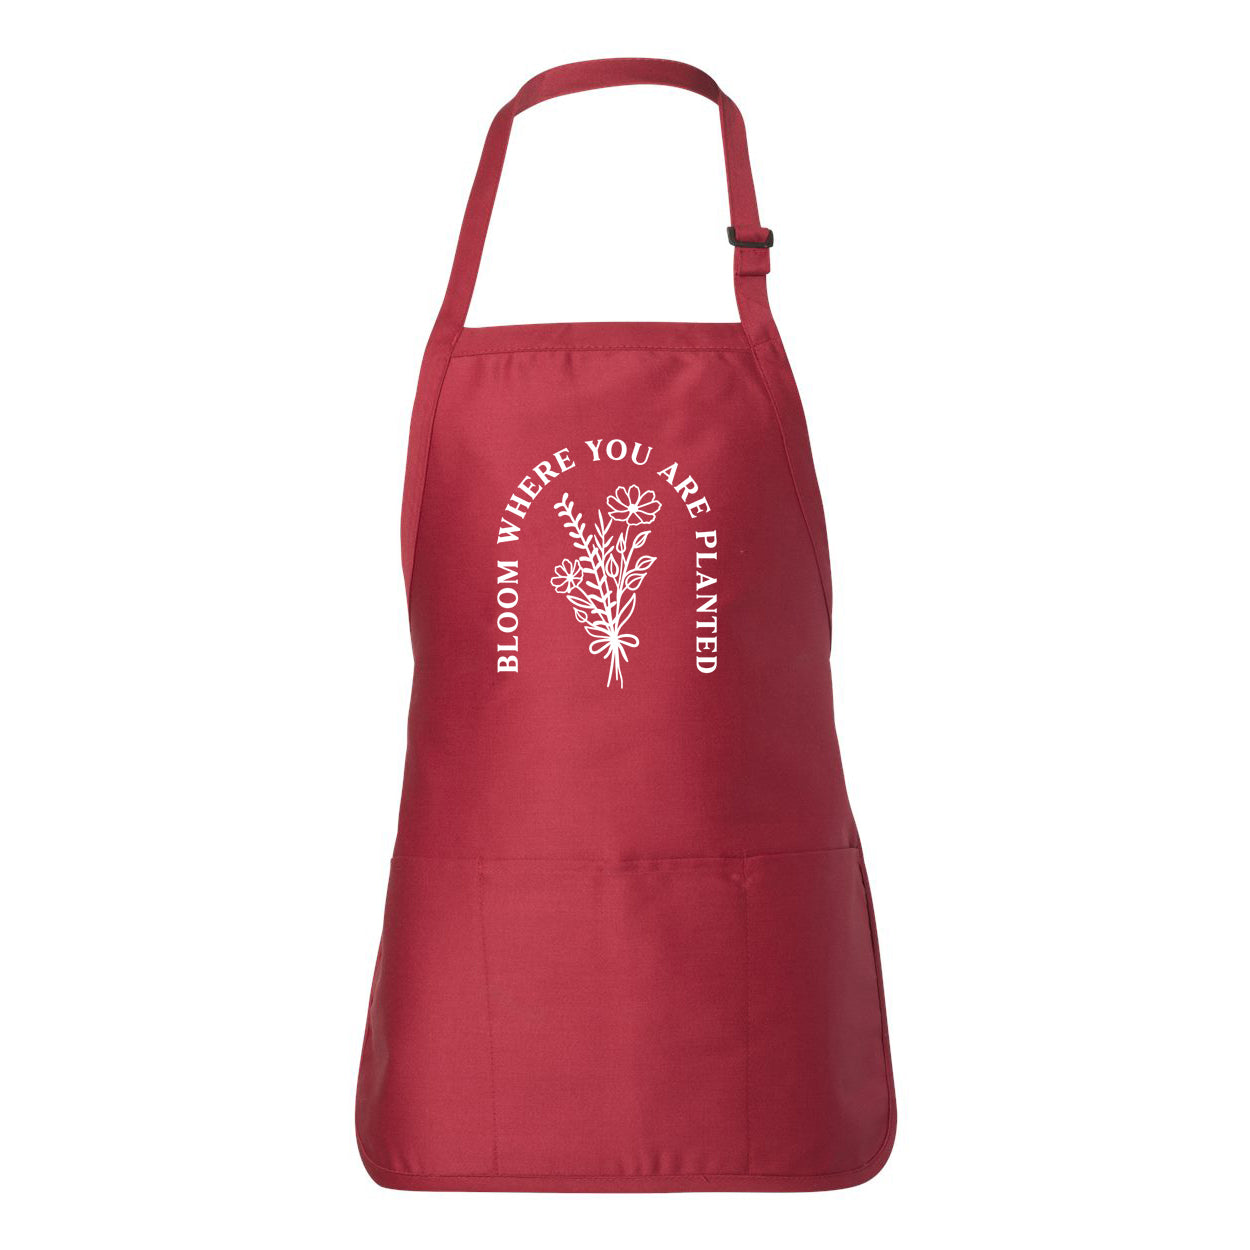 Bloom Where You Are Planted | Apron